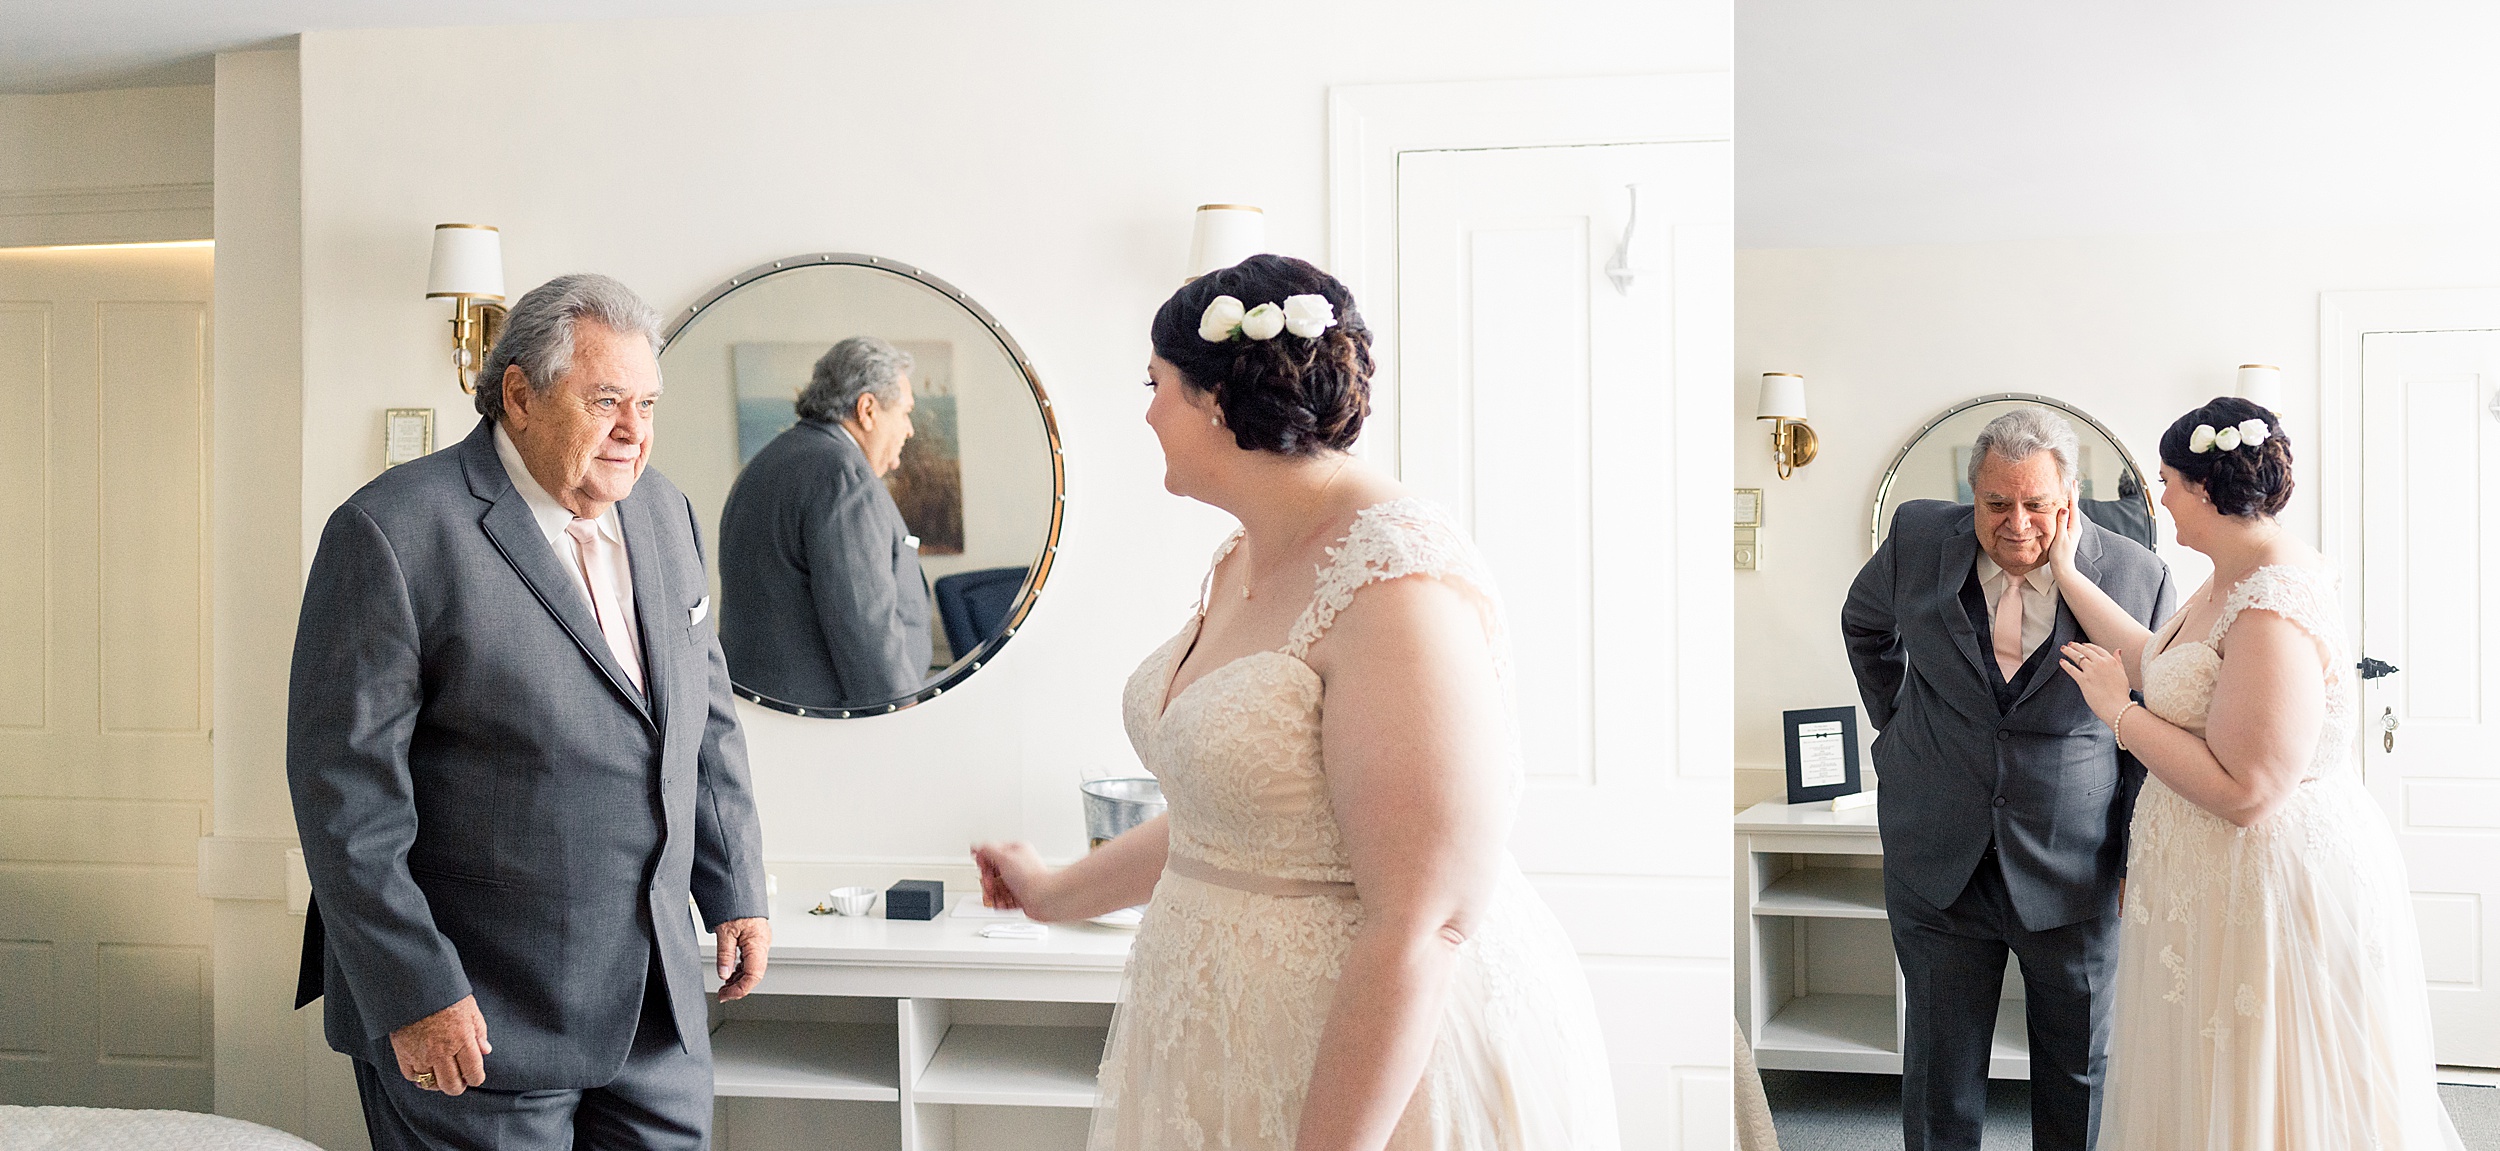 bride has sweet reveal with her grandfather before she sees her groom at her york harbor inn wedding in york Maine